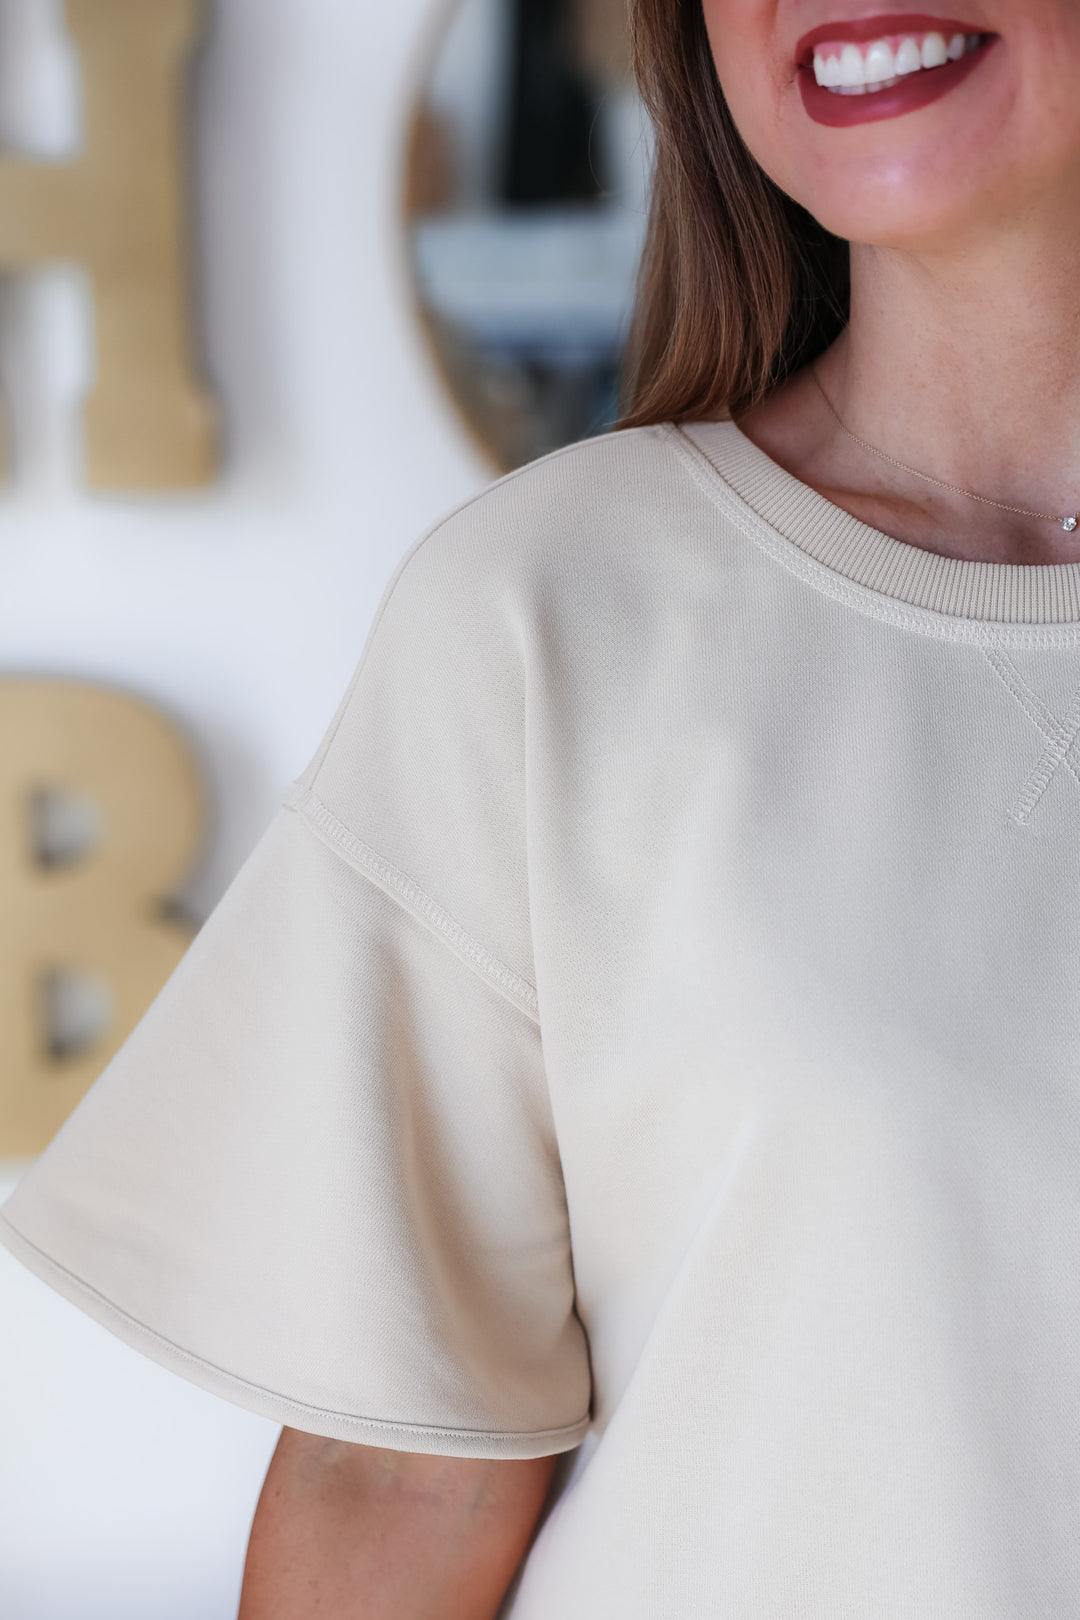 A closeup of the shoulder of a woman wearing a short sleeve tan colored sweatshirt.